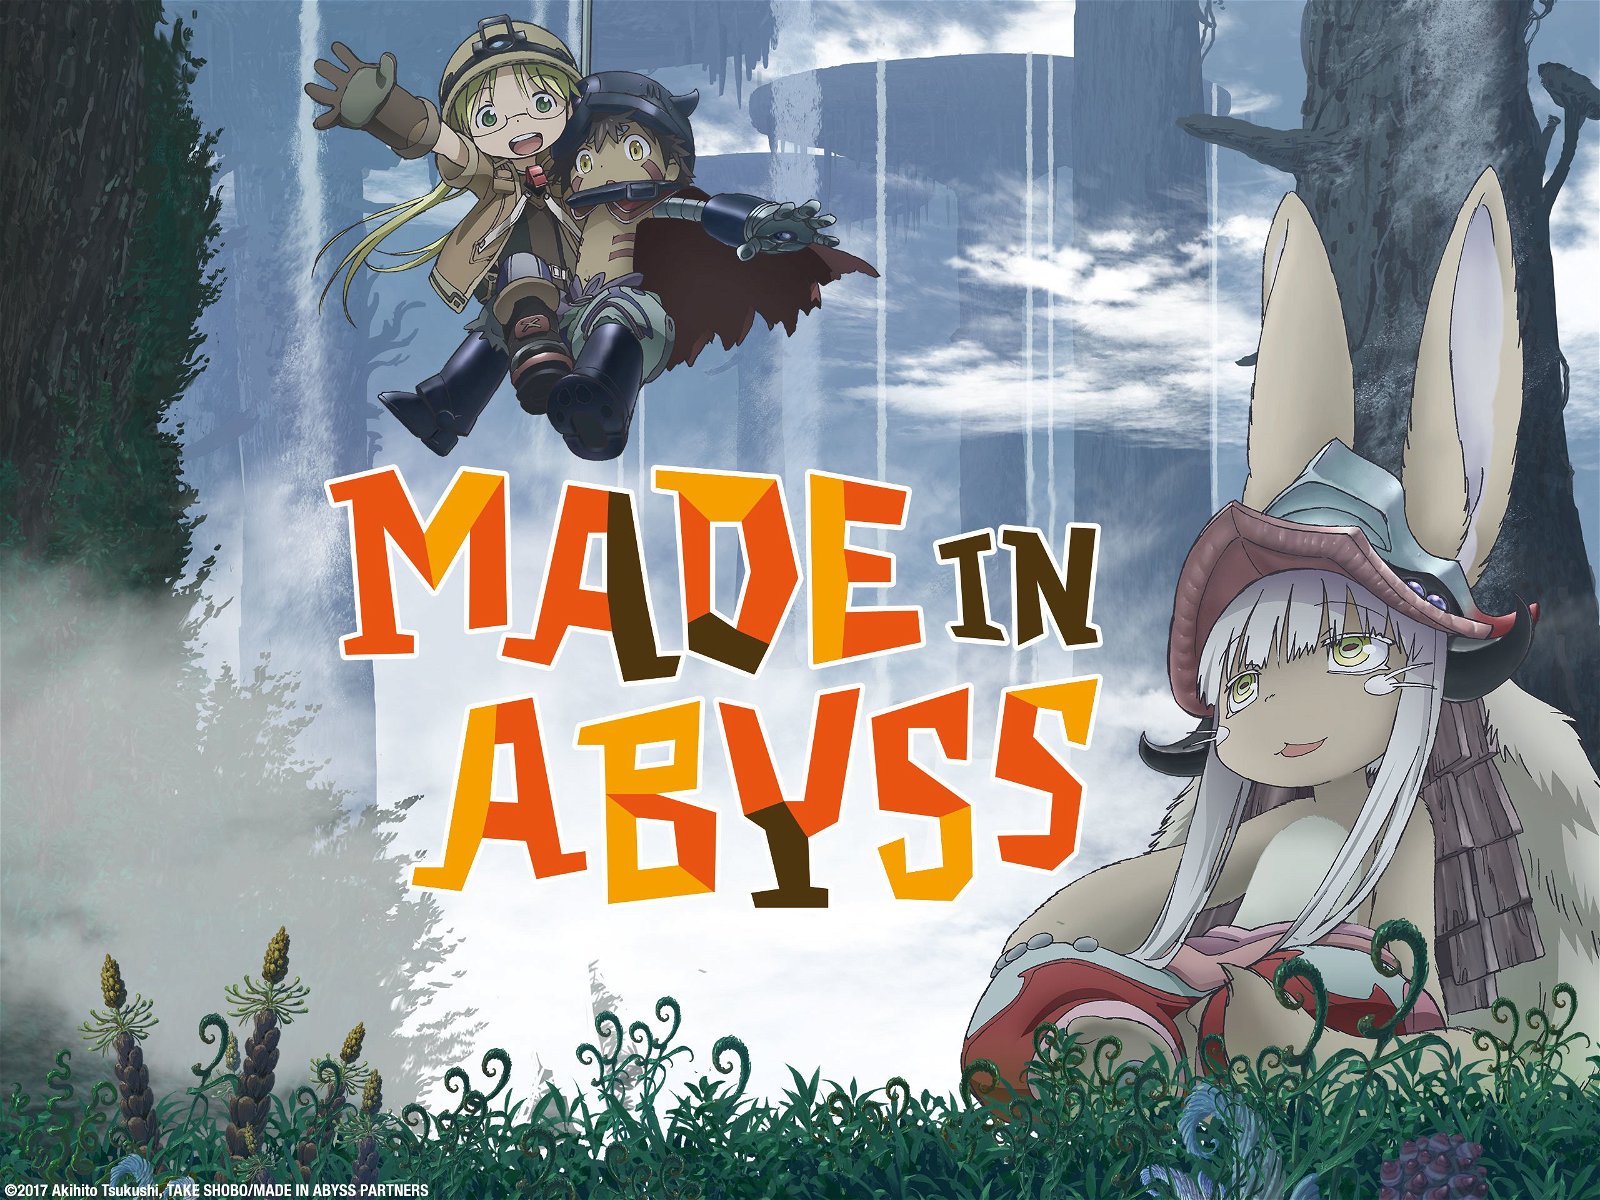 Made in Abyss Trailer anime 2017 